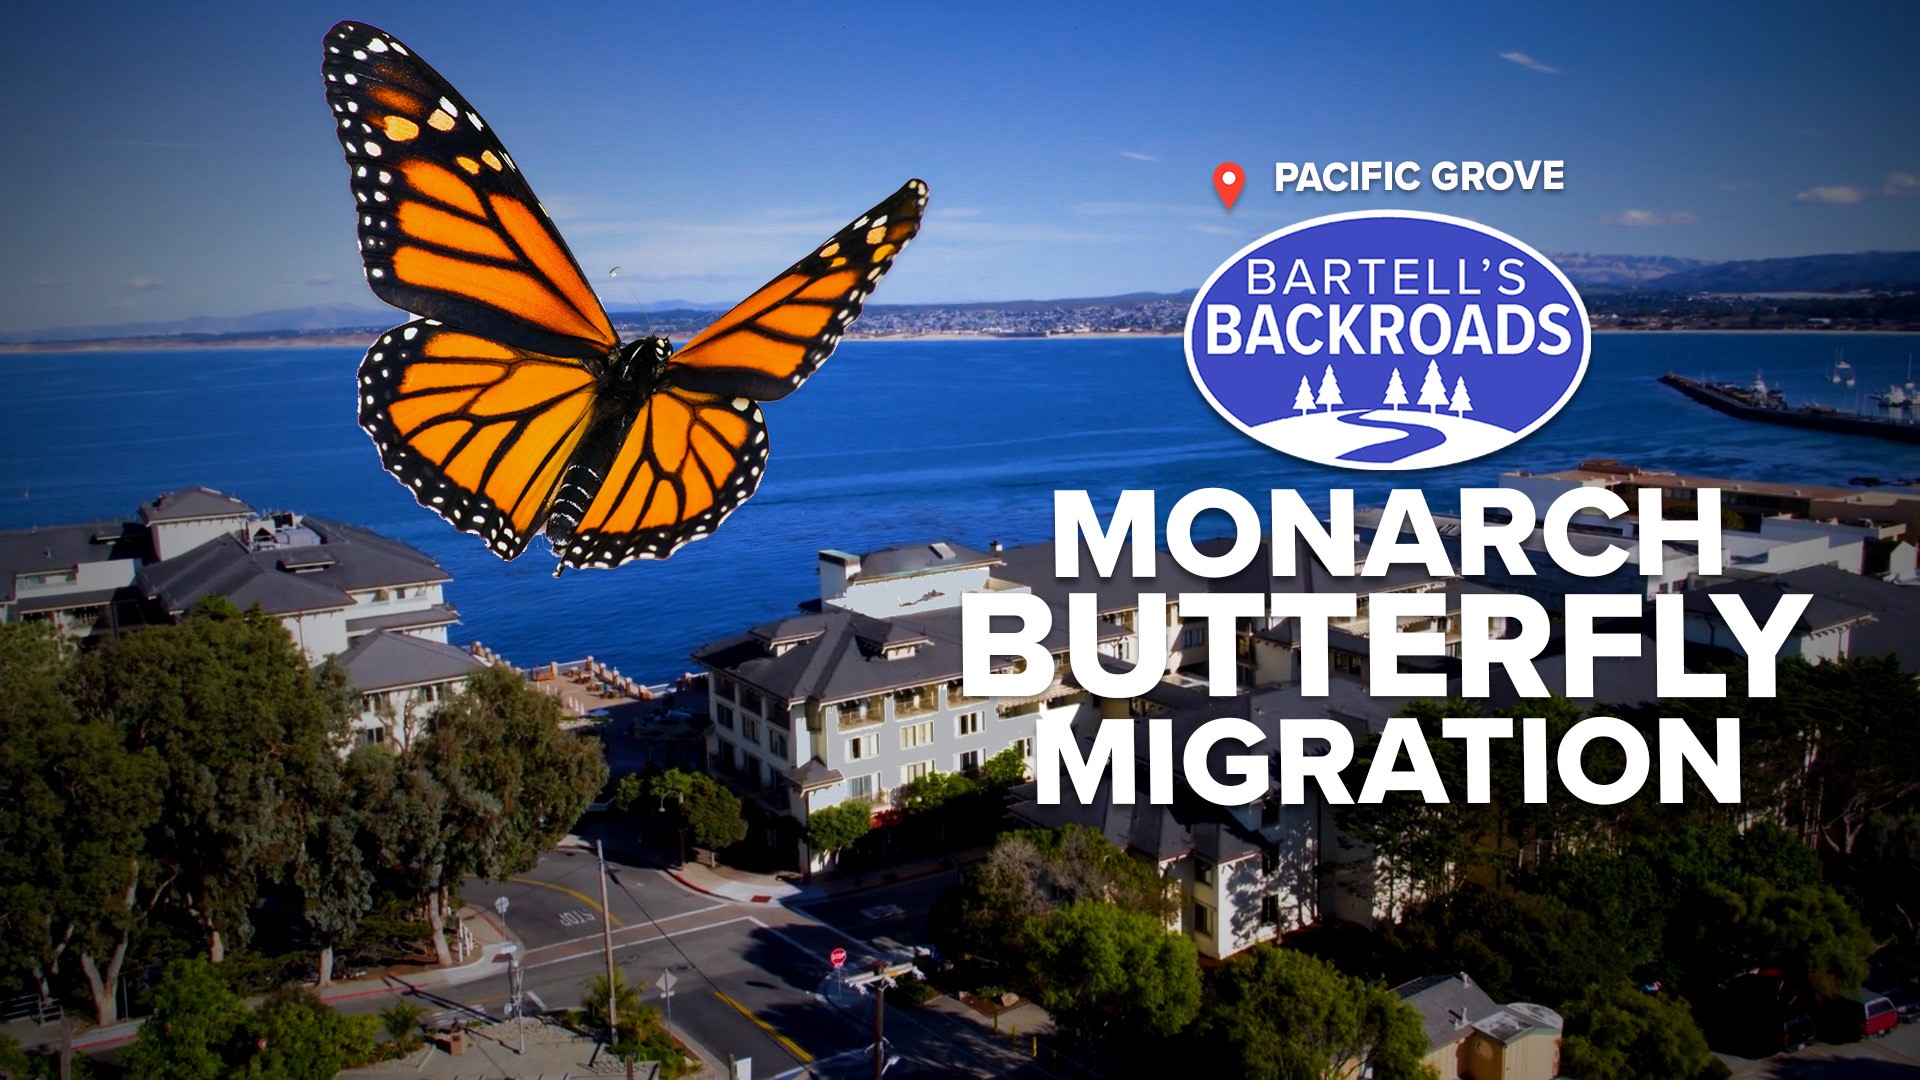 Pacific Grove is one of the largest wintering sites for the western monarch butterfly, and at this time of year you'll see them wherever you look.